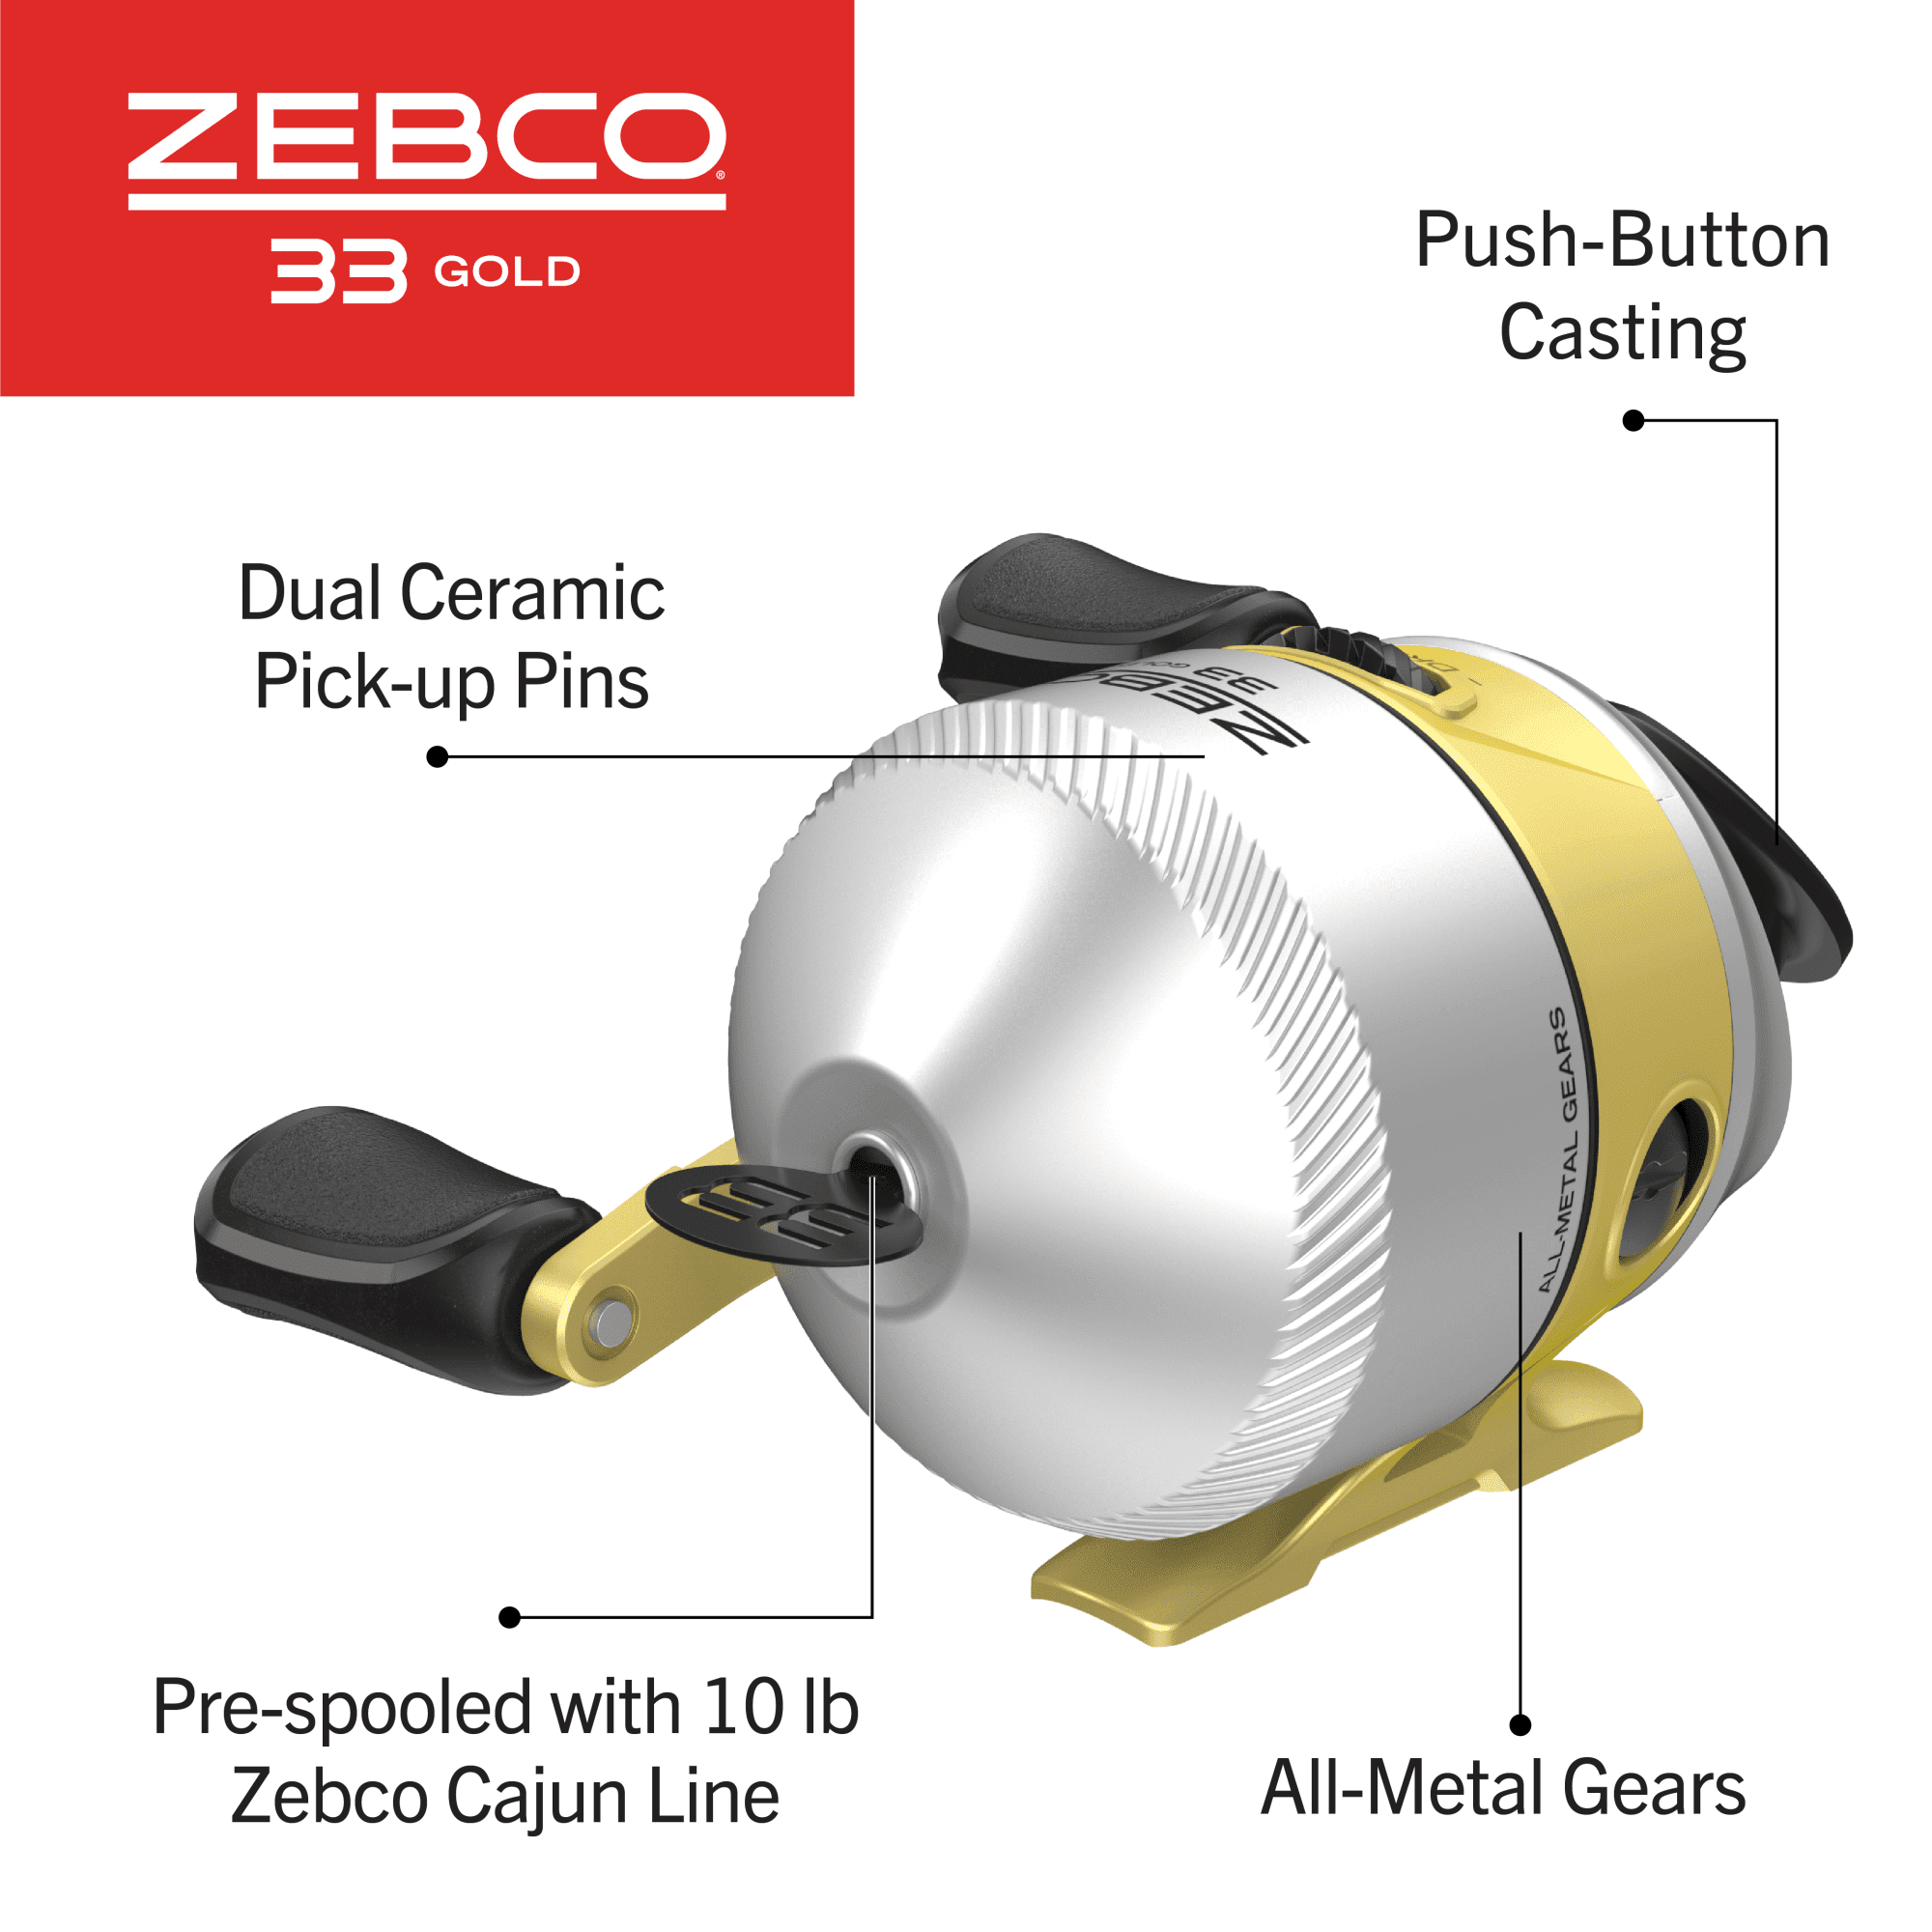 Zebco 33 Gold Spincast Fishing Reel, Size 30 Reel, Changeable Right- or  Left-Hand Retrieve, Durable All-Metal Gears, Pre-Spooled with 10-Pound  Zebco Cajun Fishing Line, Silver/Gold 